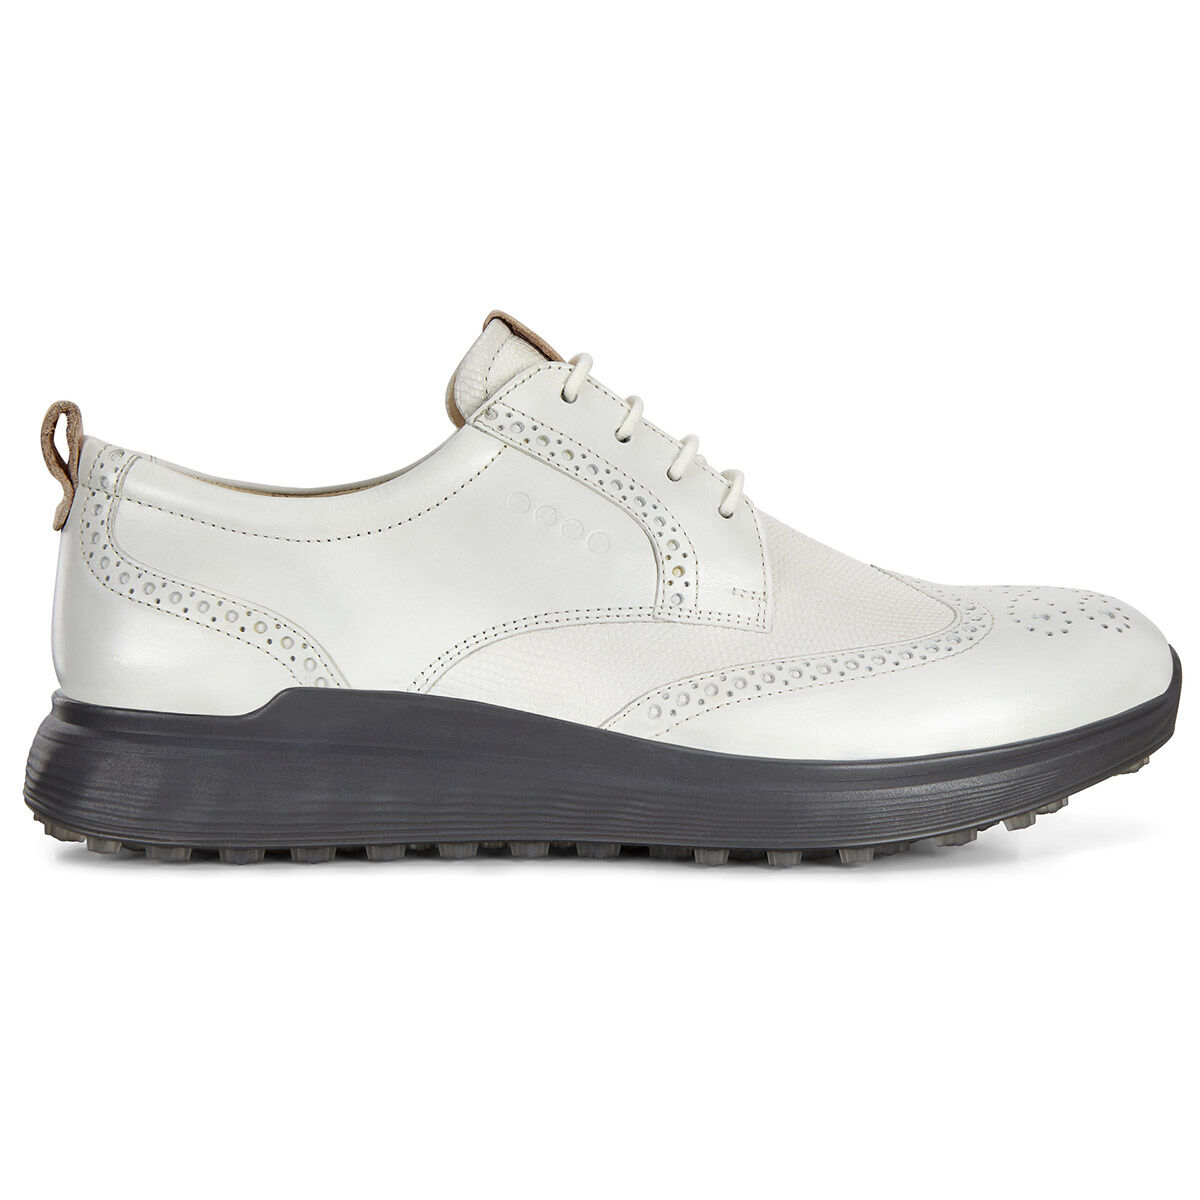 shoes similar to ecco